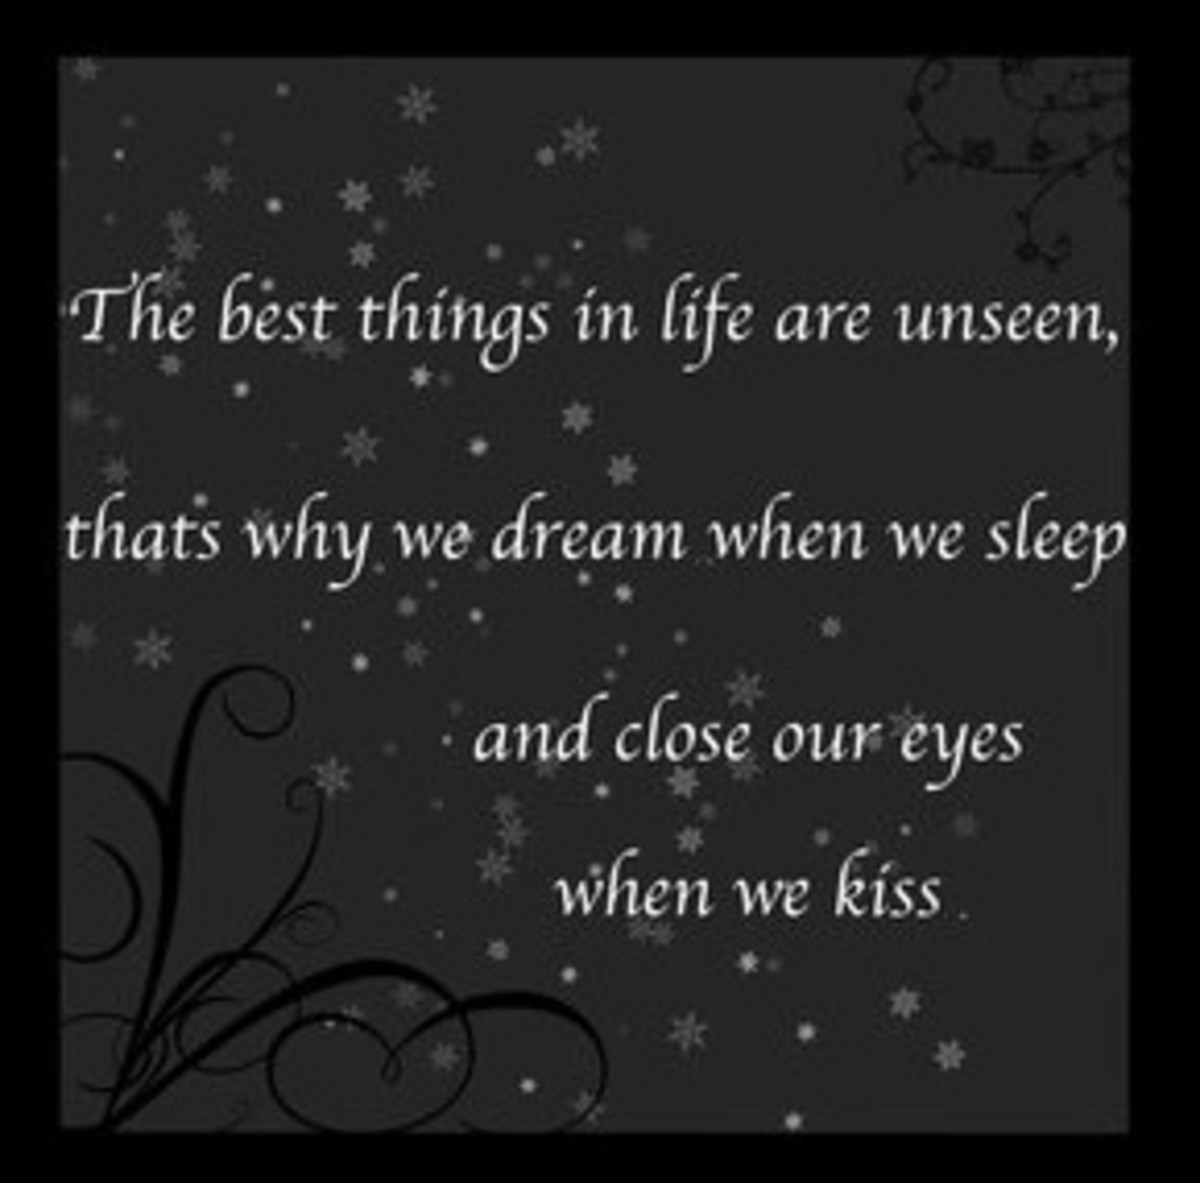 The best things in life are unseen, that why we dream when we sleep and close our eyes when we kiss.